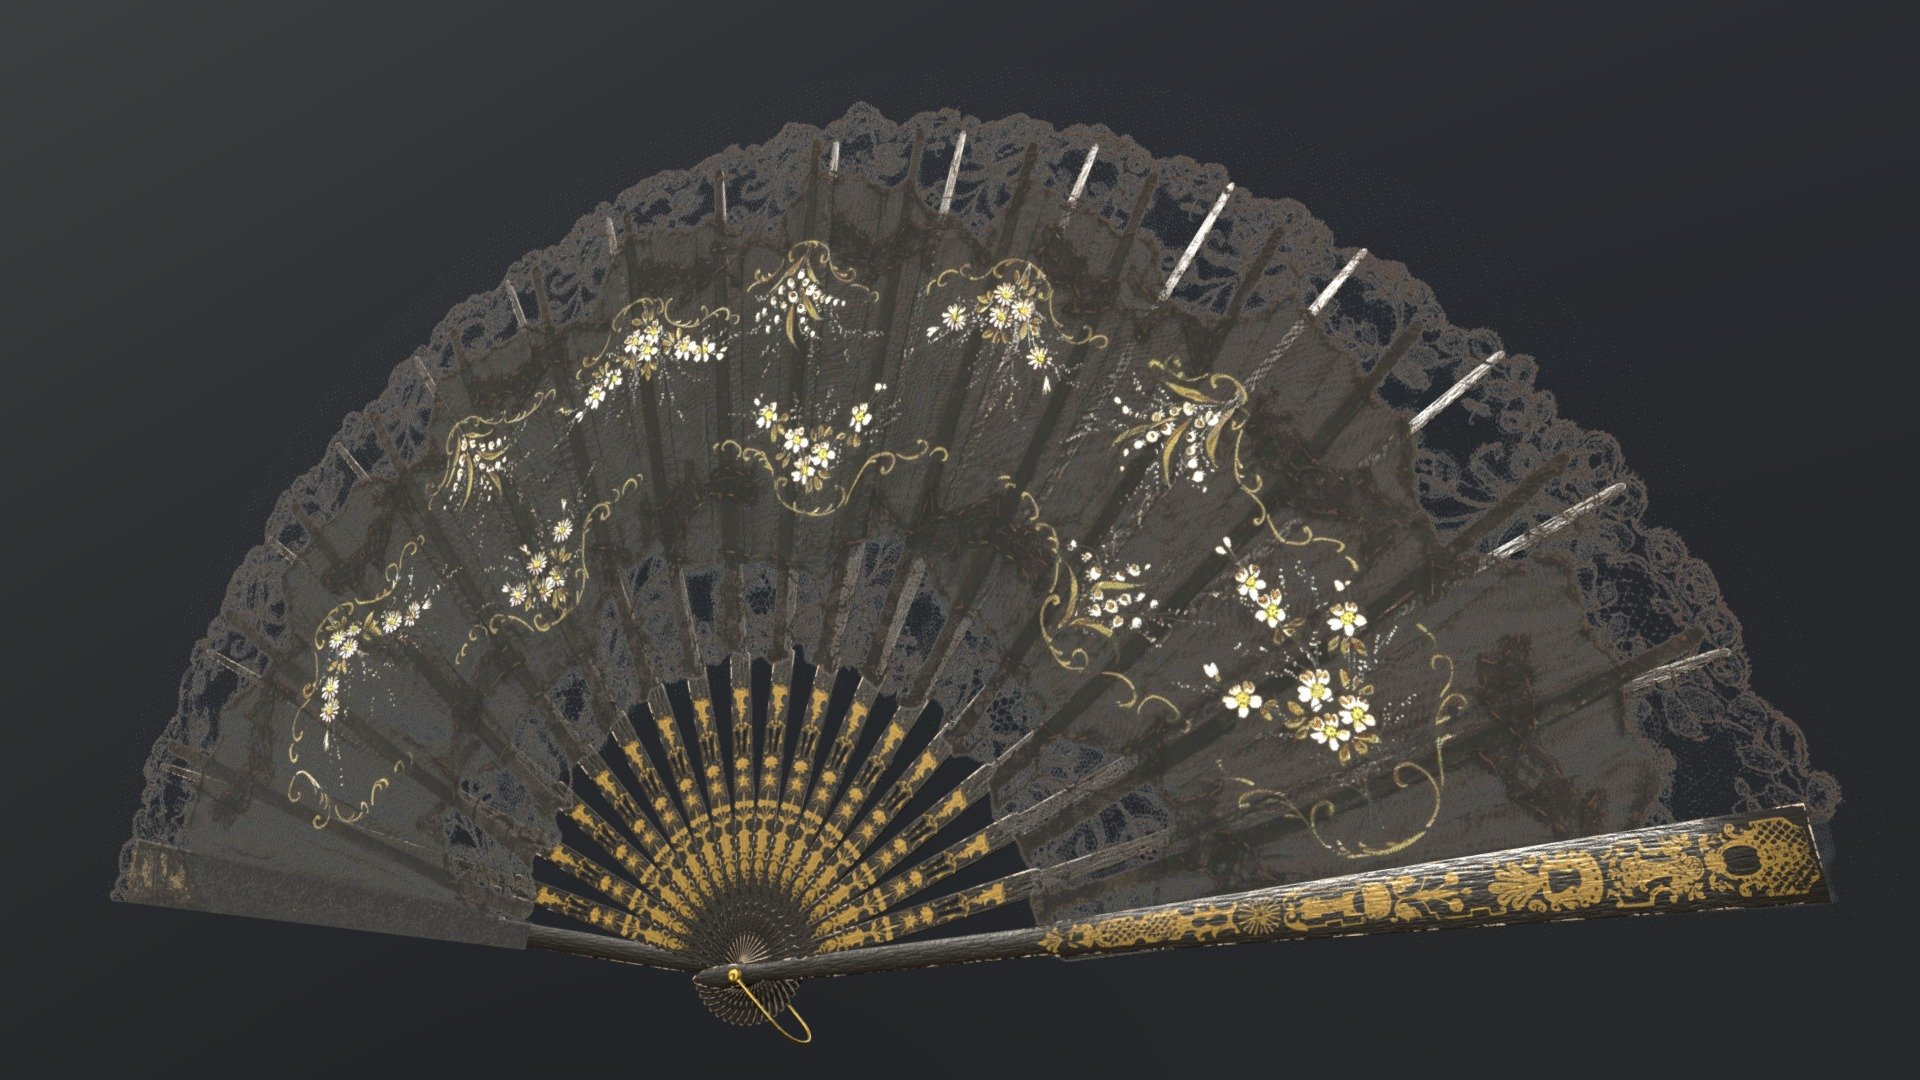 Western Europe 
1880s 
Dimensions: 34.5 х 22.2 х 63 cm
Materials: wood, gouache, gauze, lace, brass
Technique: carving, engraving, gilding, painting - Folding fan with may-lilies - 3D model by AERO3D (@aero3d.ua) 3d model